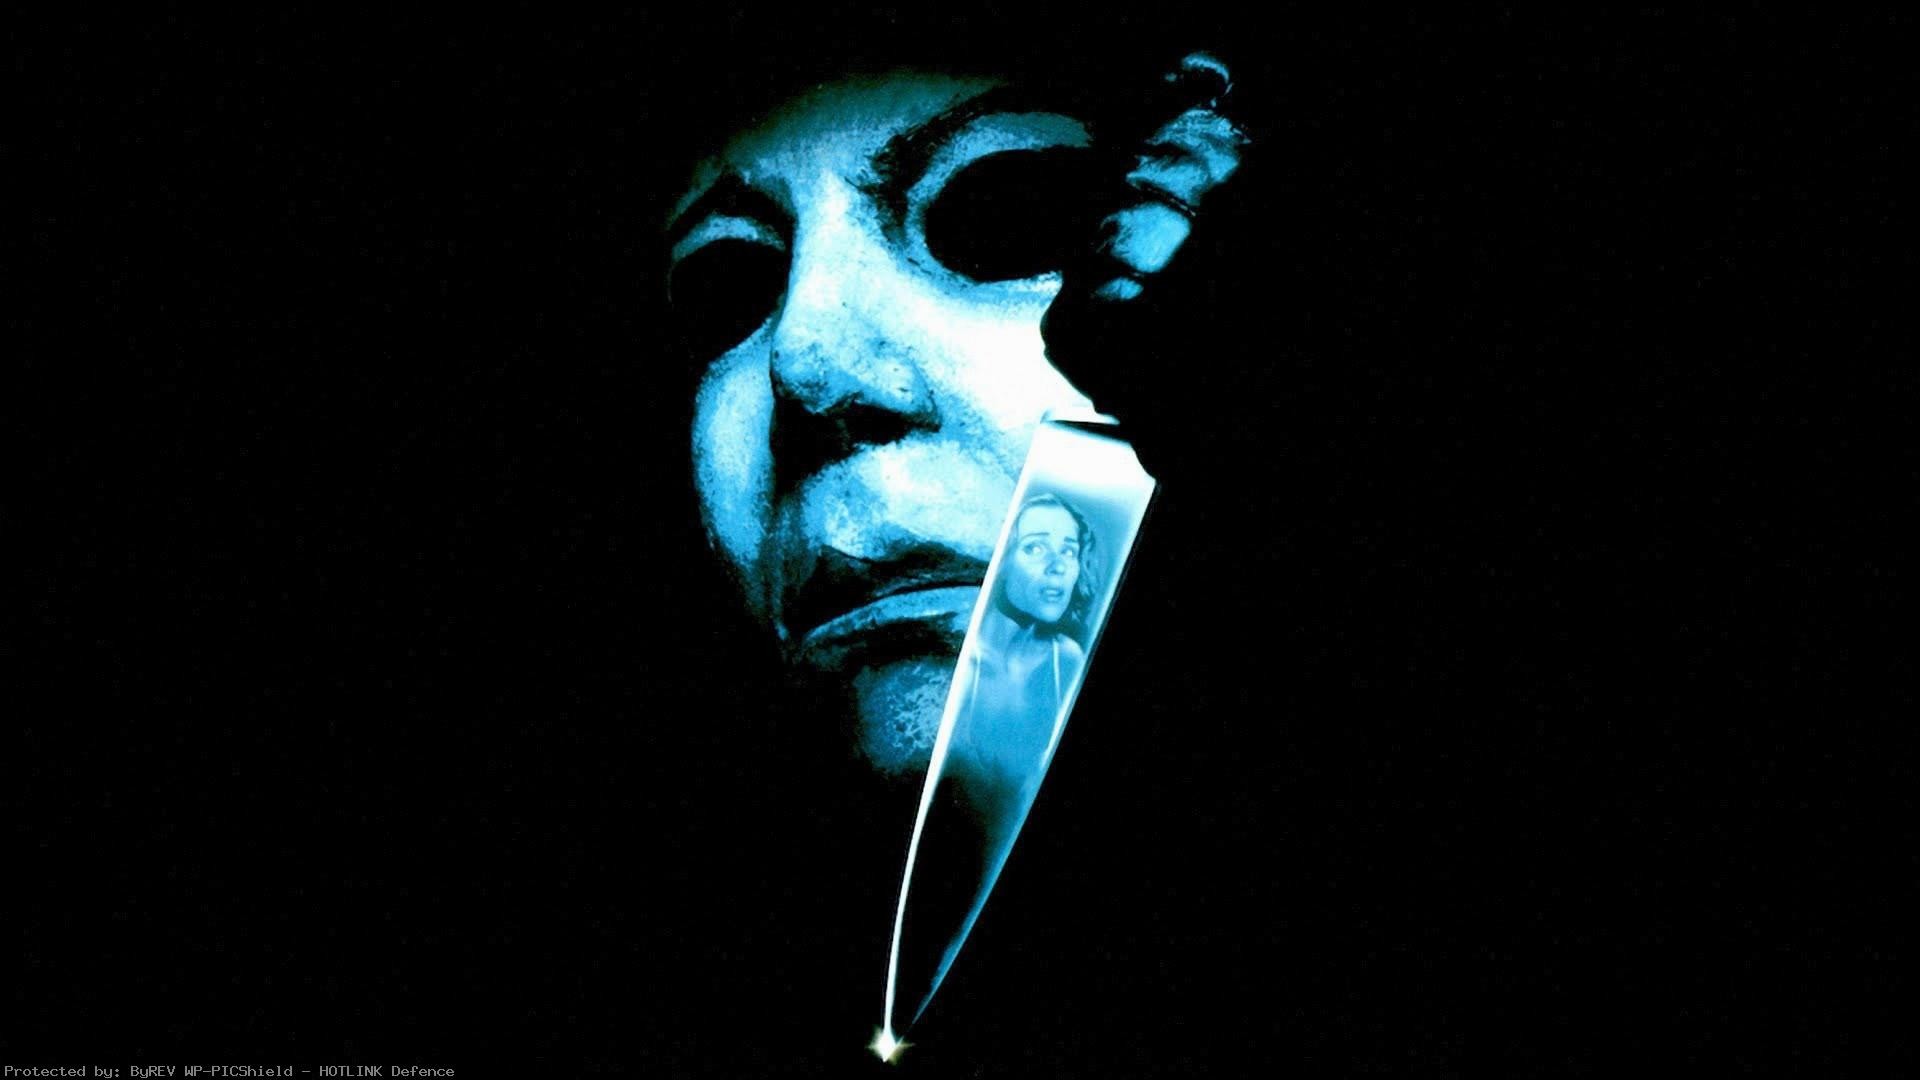 1920×1080-px-michael-myers-Full-HD-Backgrounds-by-